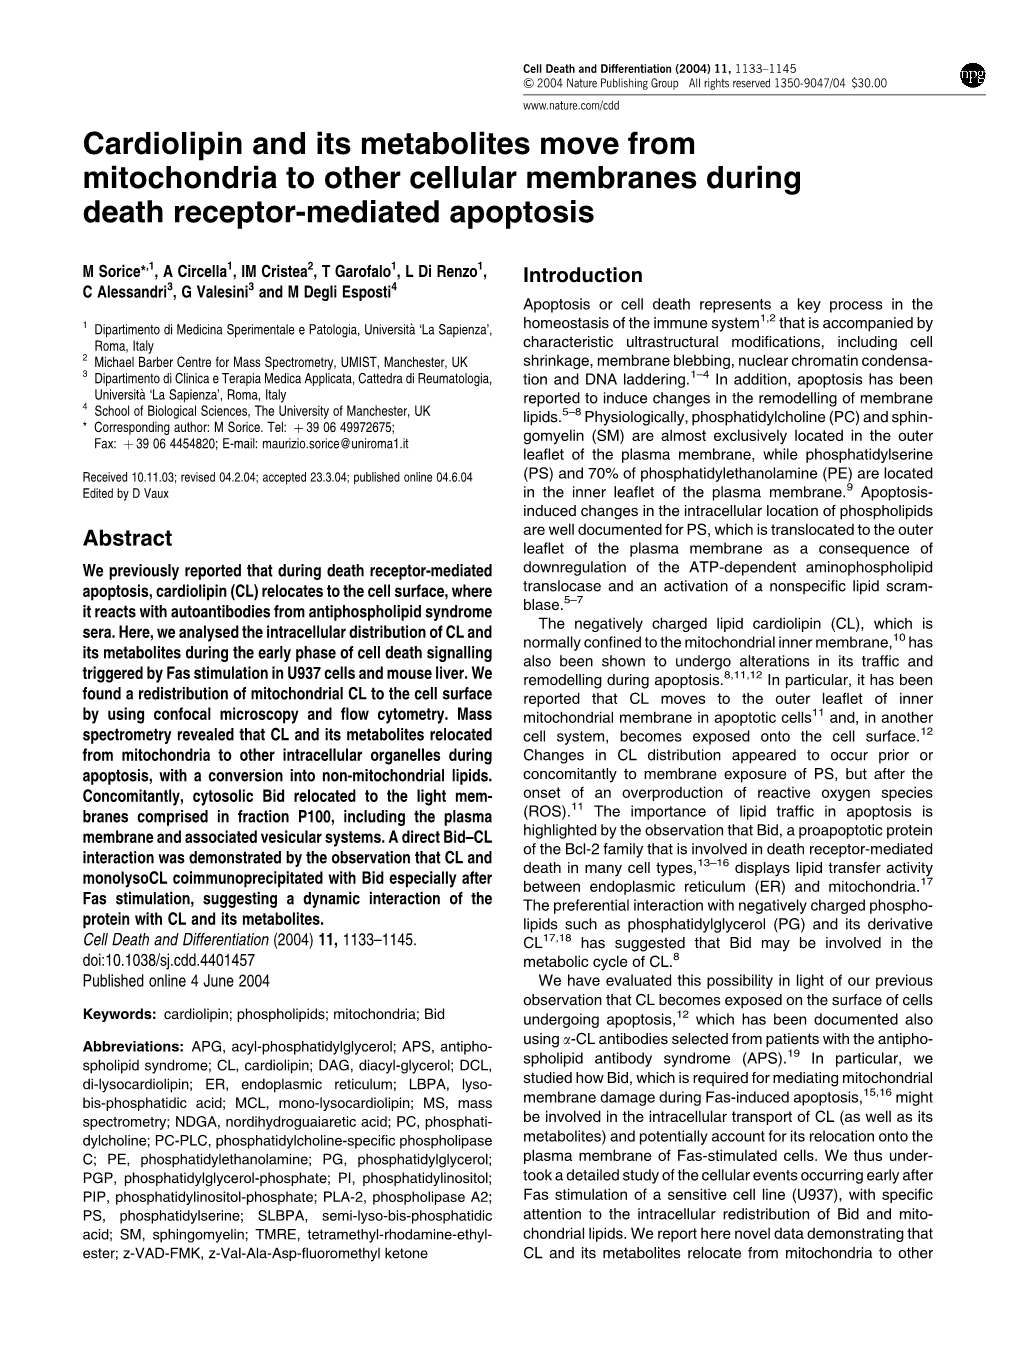 Cardiolipin and Its Metabolites Move from Mitochondria to Other Cellular Membranes During Death Receptor-Mediated Apoptosis